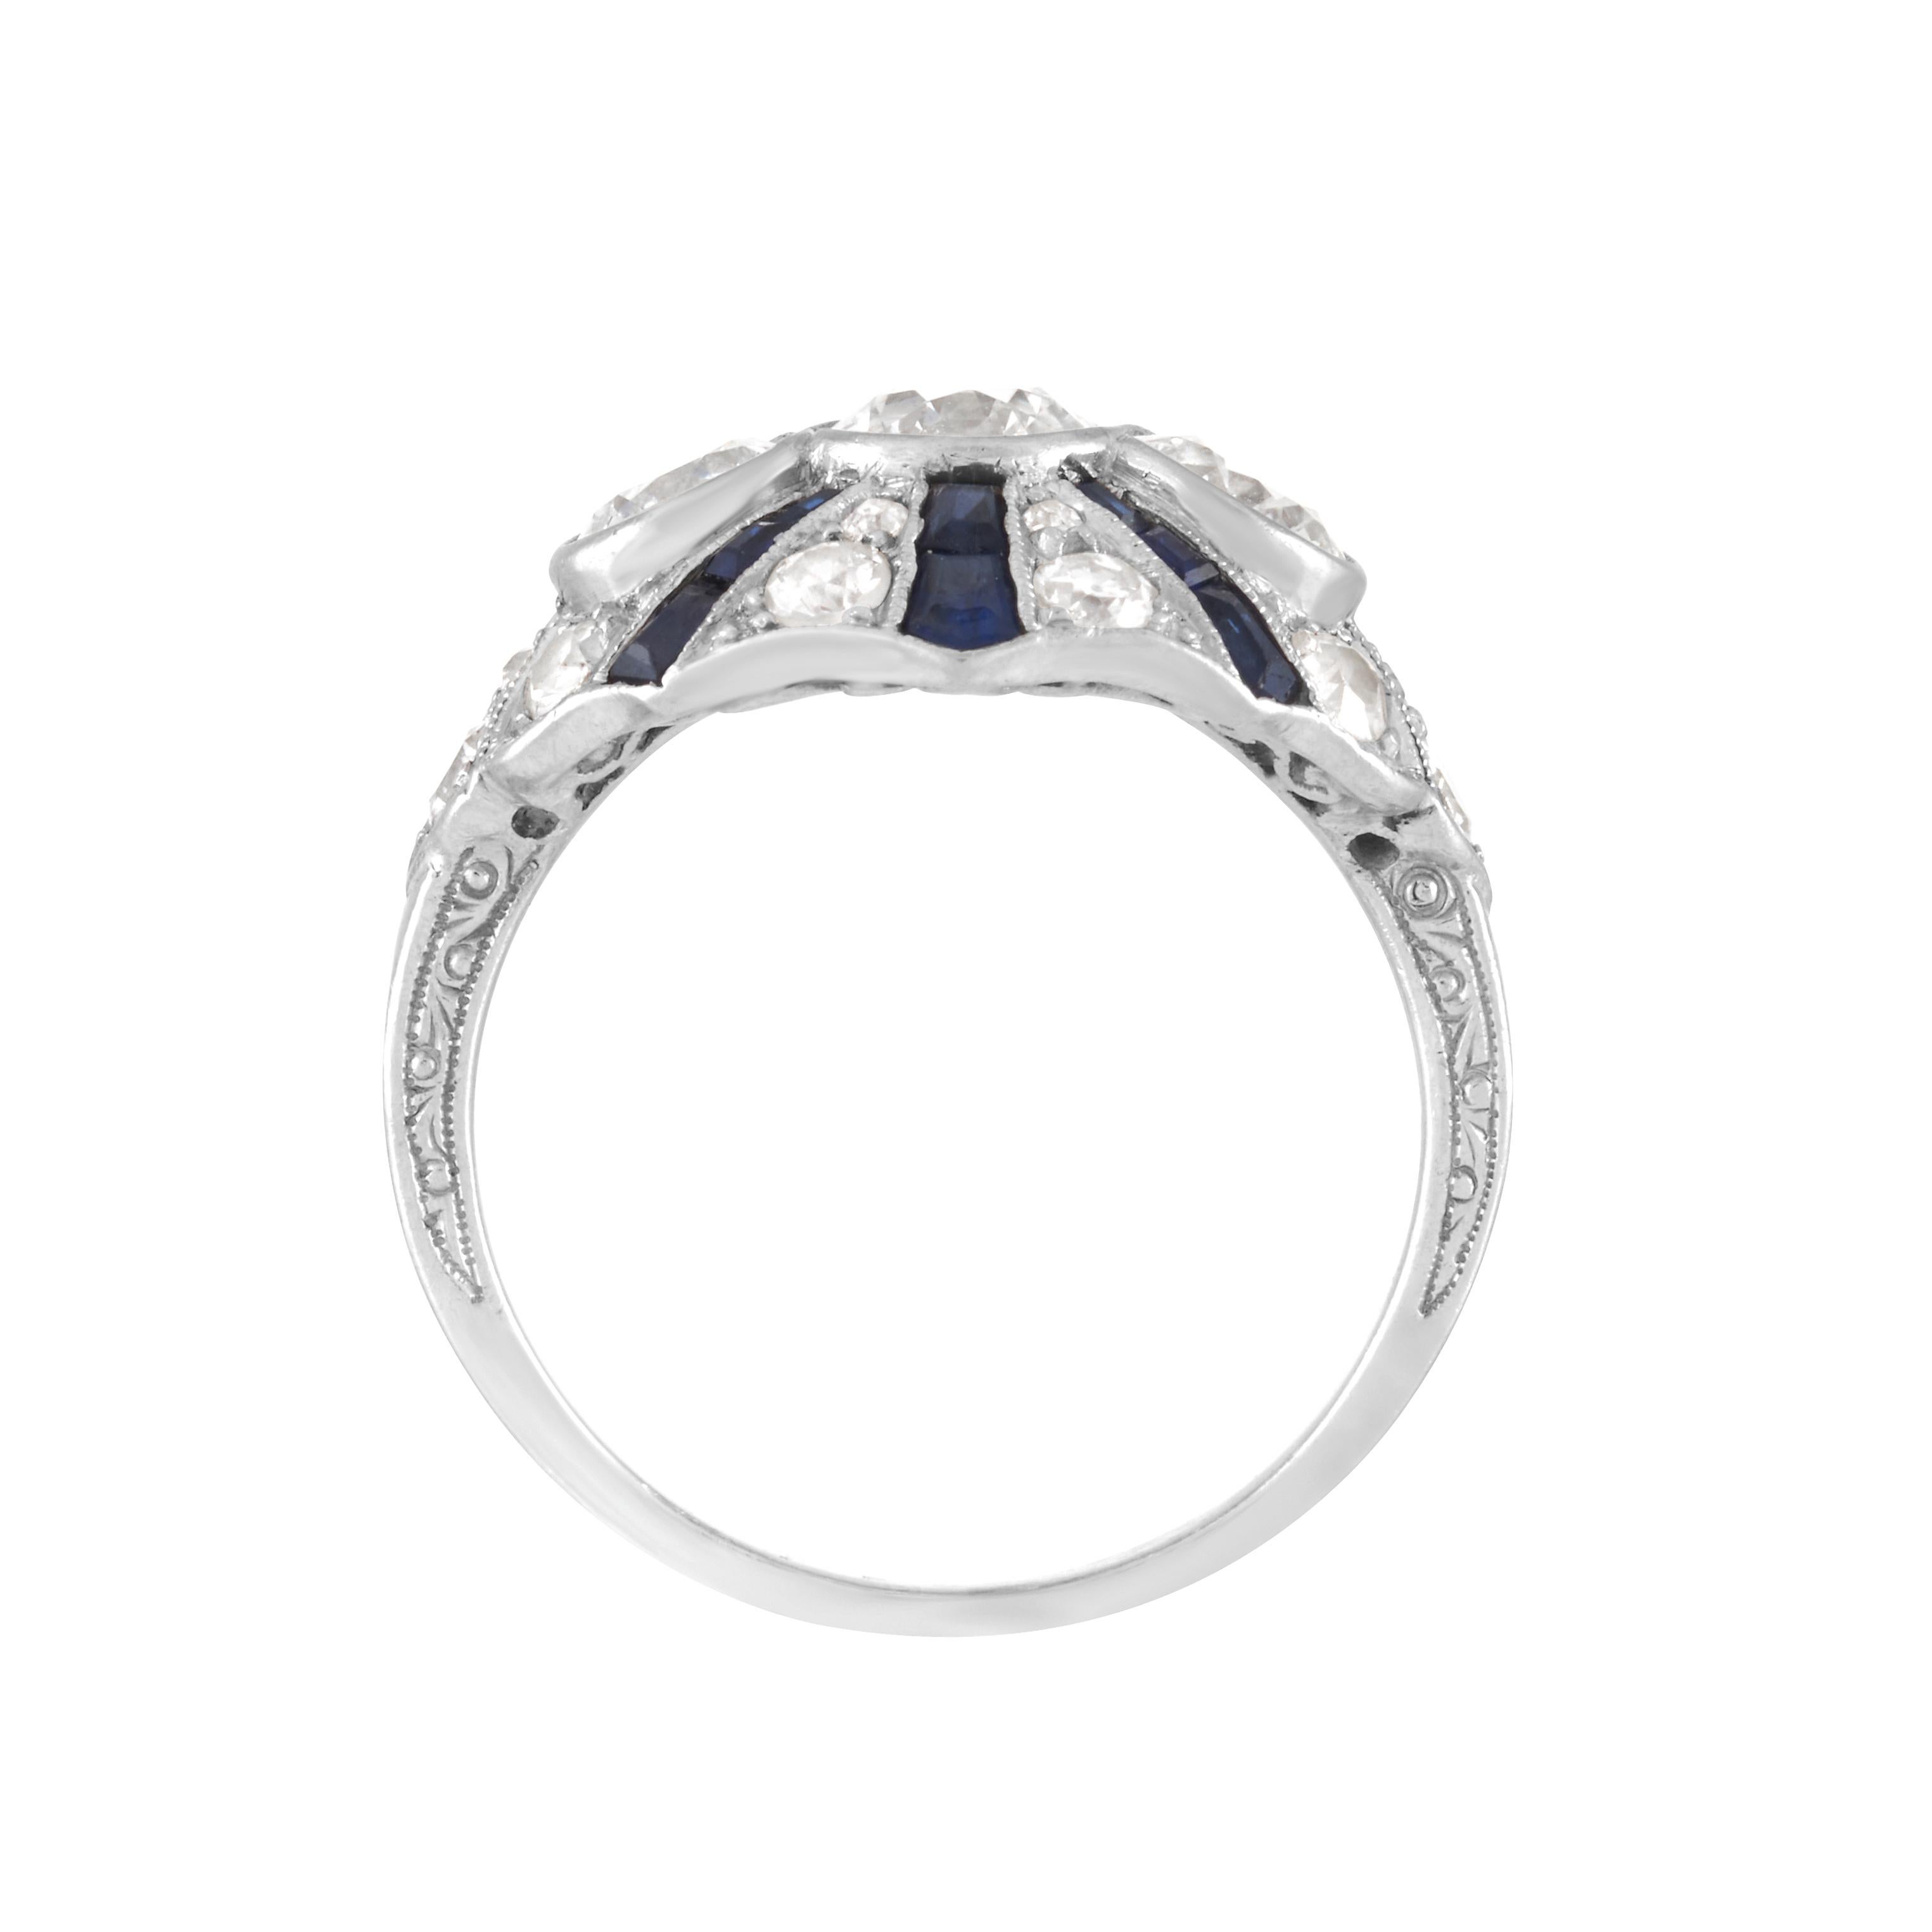 Women's Art Deco Old European Cut Diamond and Synthetic Sapphire Ring in Platinum